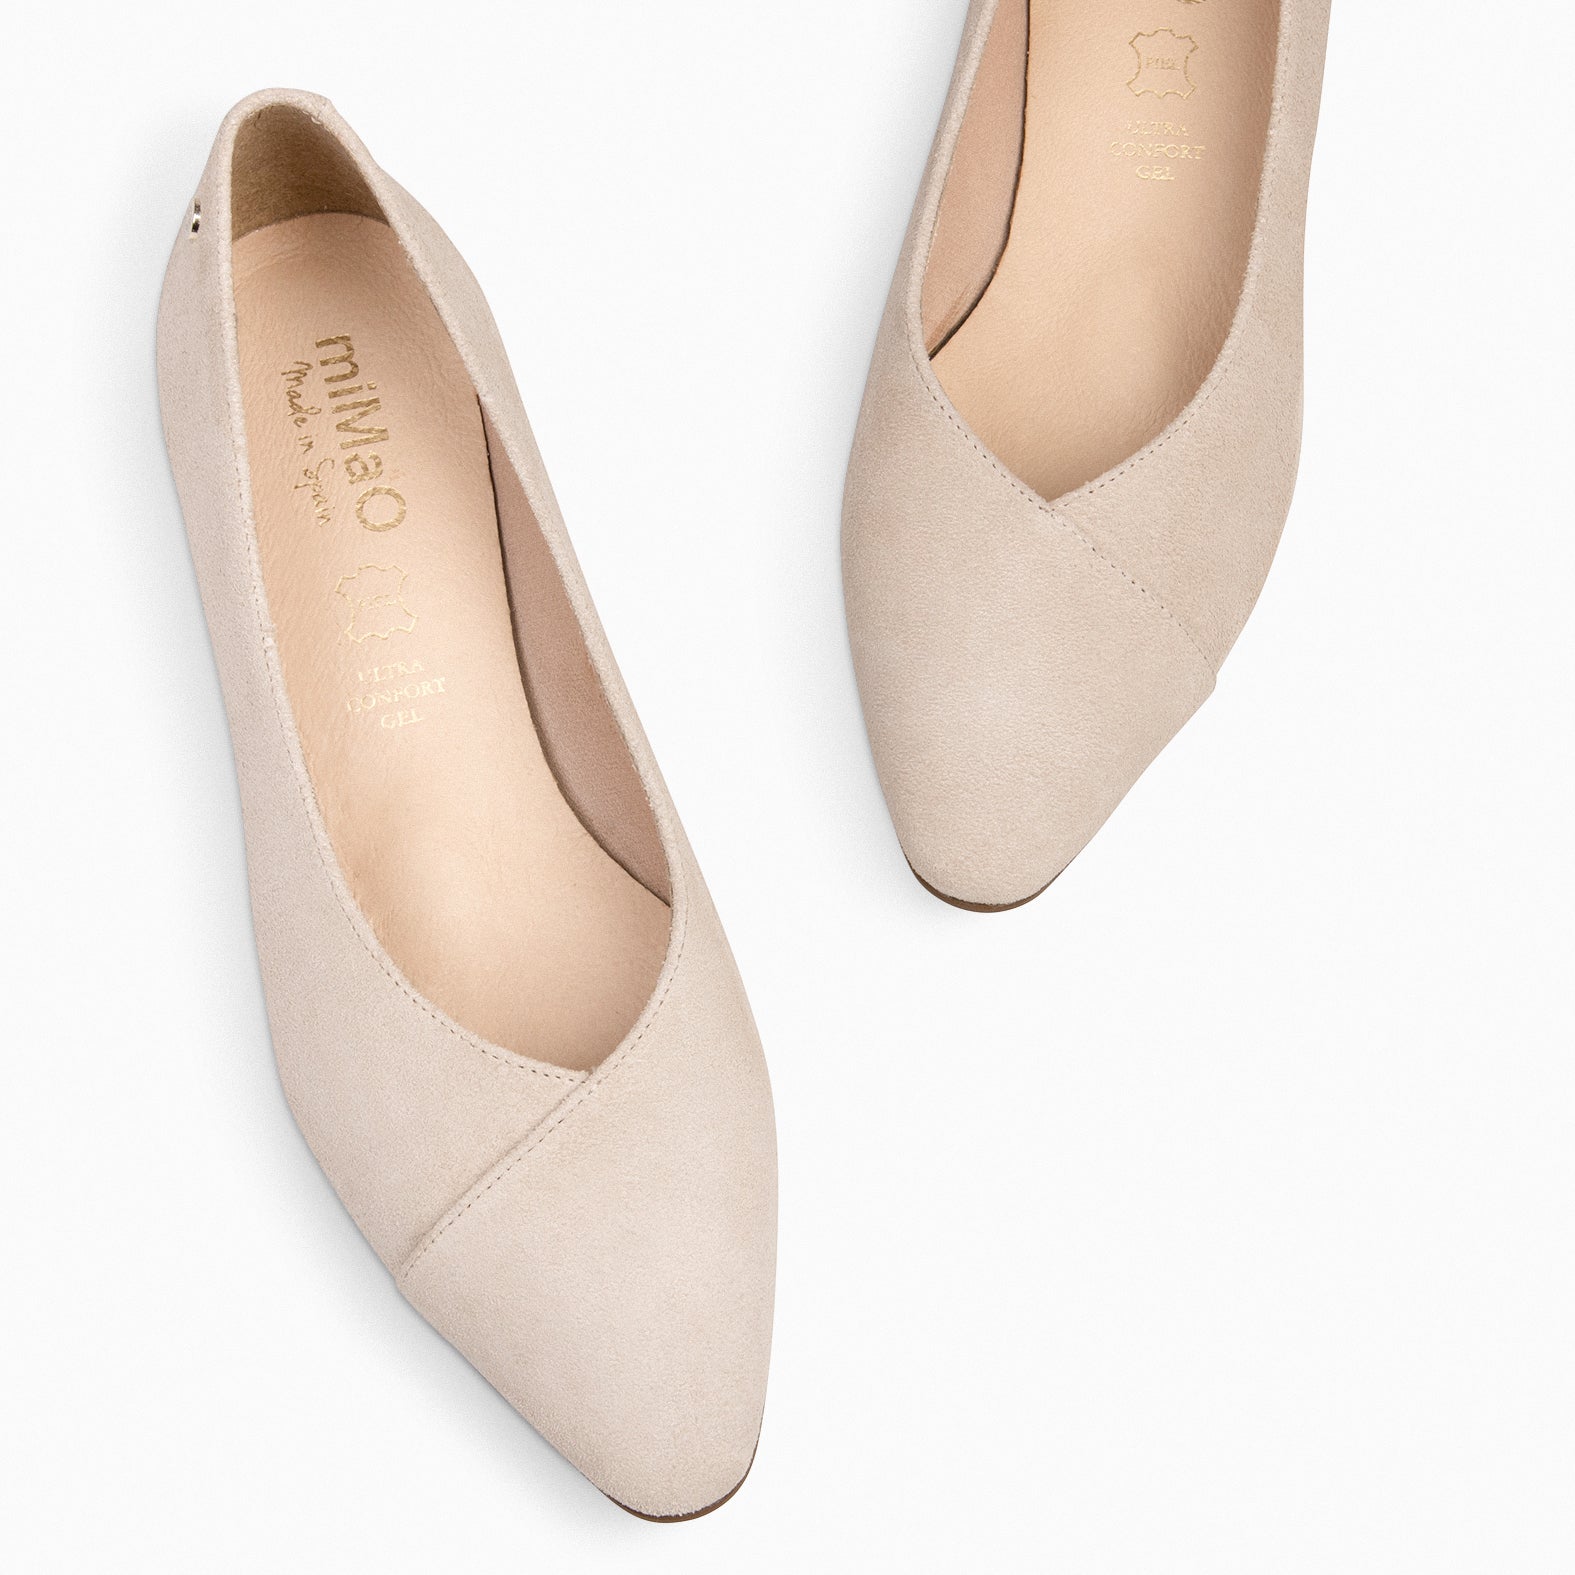 MARIE – BEIGE pointed flats